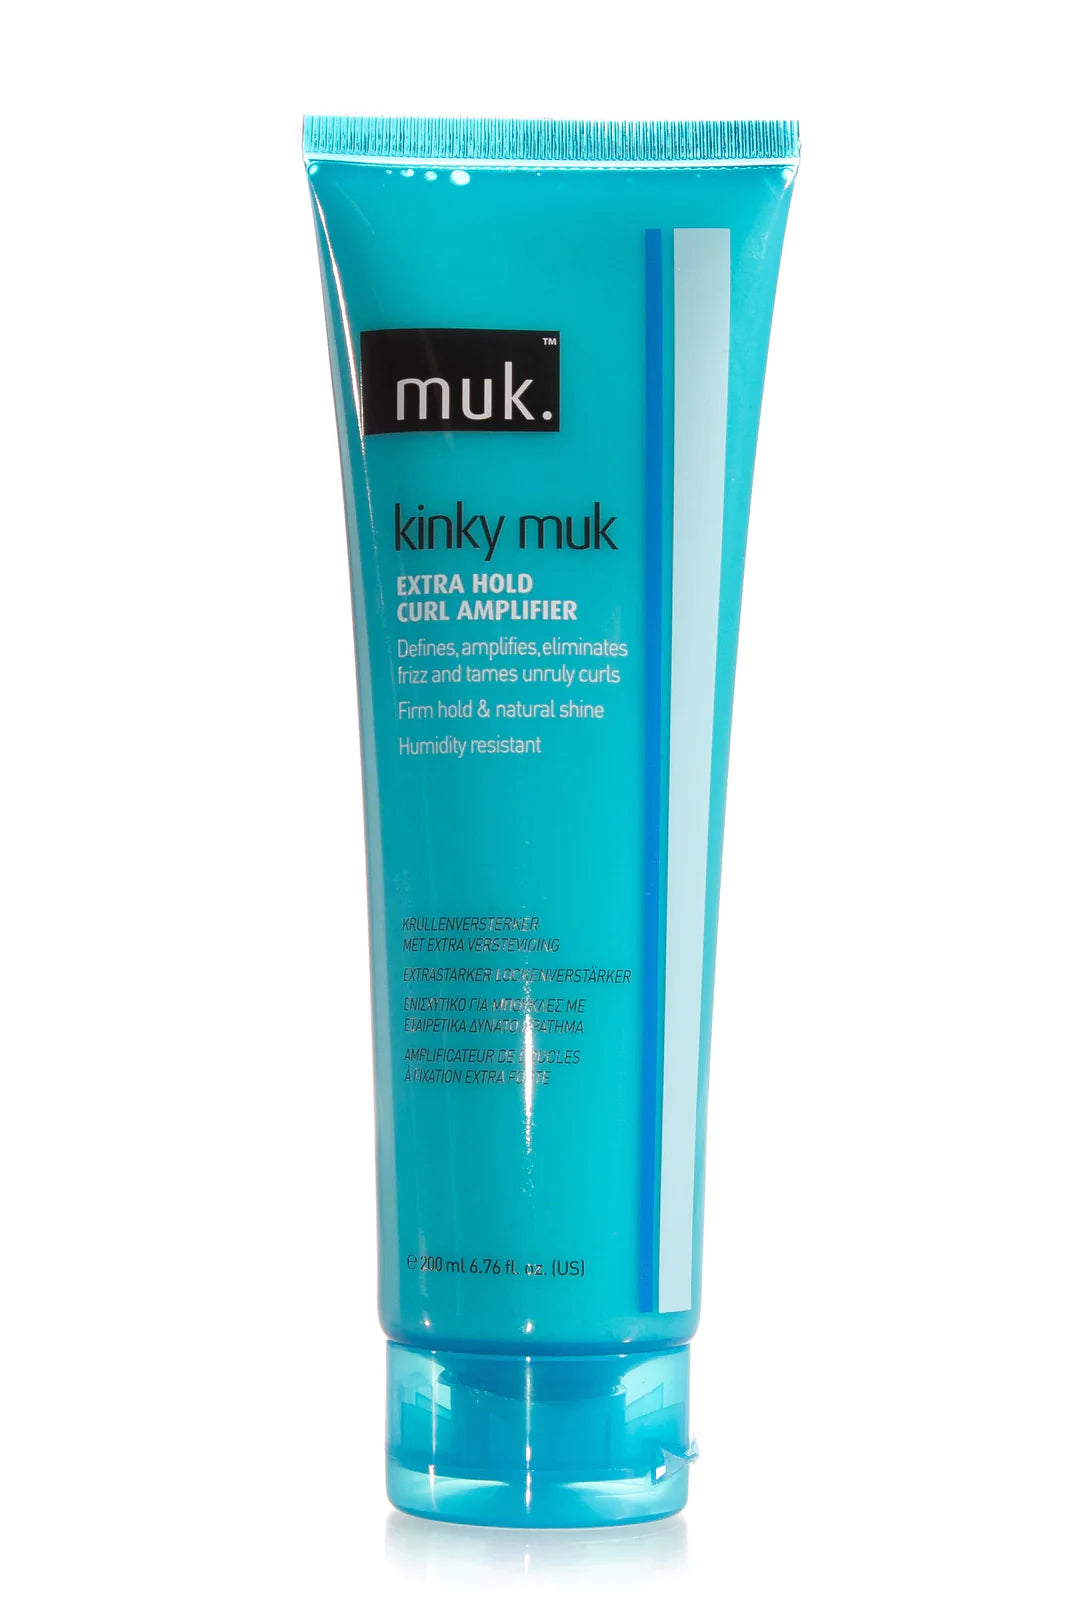 Muk Kinky Extra Hold Curl Amplifier 200ml